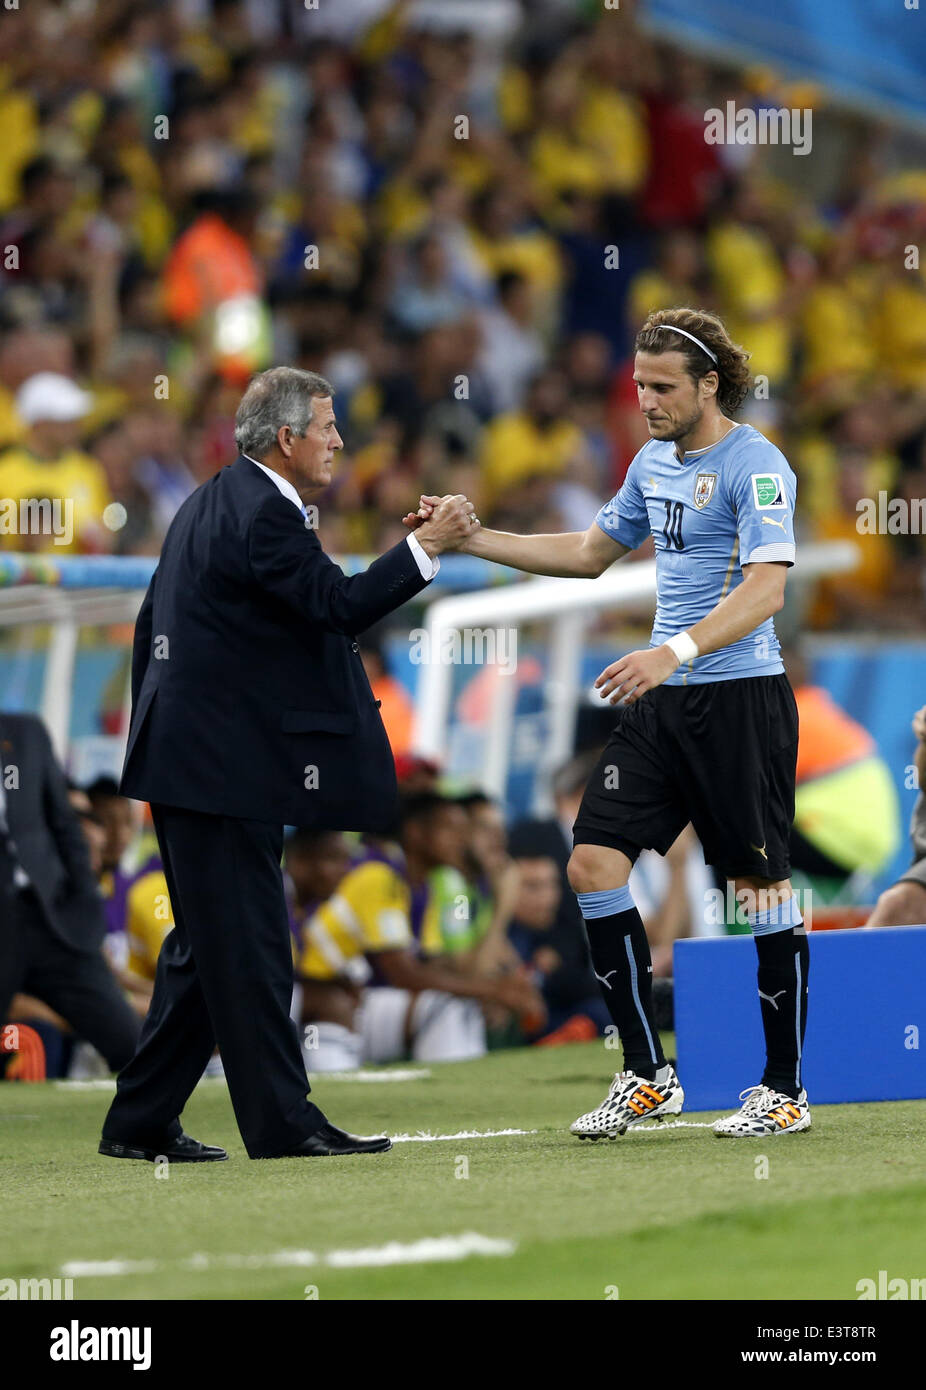 Rio De Janeiro, Brazil. 28th June, 2014. Uruguay's coach Oscar Washington Tabarez (L) shakes hands with replaced Diego Forlan during a Round of 16 match between Colombia and Uruguay of 2014 FIFA World Cup at the Estadio do Maracana Stadium in Rio de Janeiro, Brazil, on June 28, 2014. Colombia won 2-0 over Uruguay and qualified for Quarter-finals on Saturday. Credit:  Wang Lili/Xinhua/Alamy Live News Stock Photo